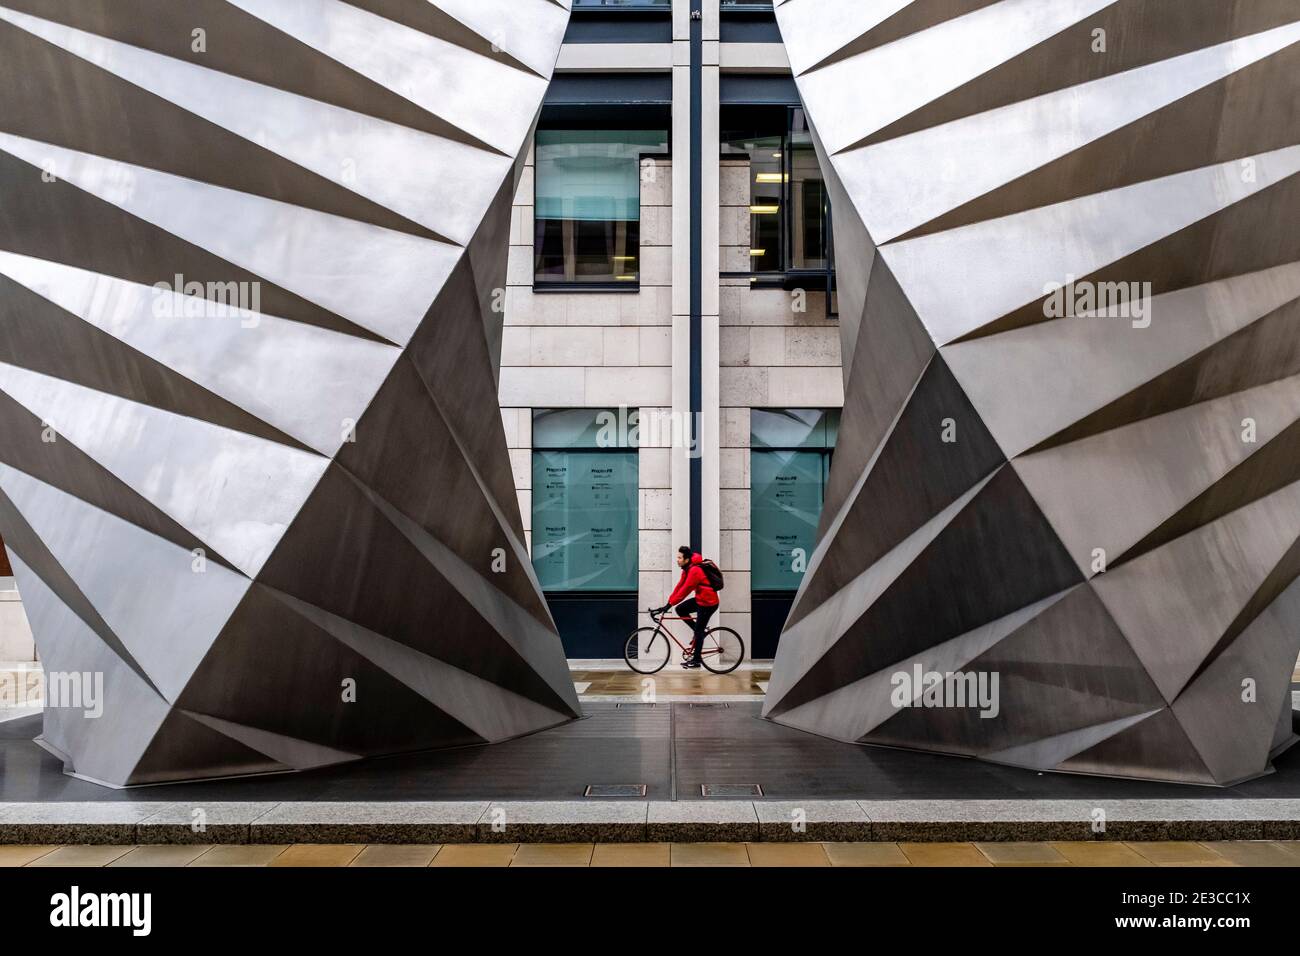 A Young Man Cycles Past The Paternoster Vents, London, UK. Stock Photo